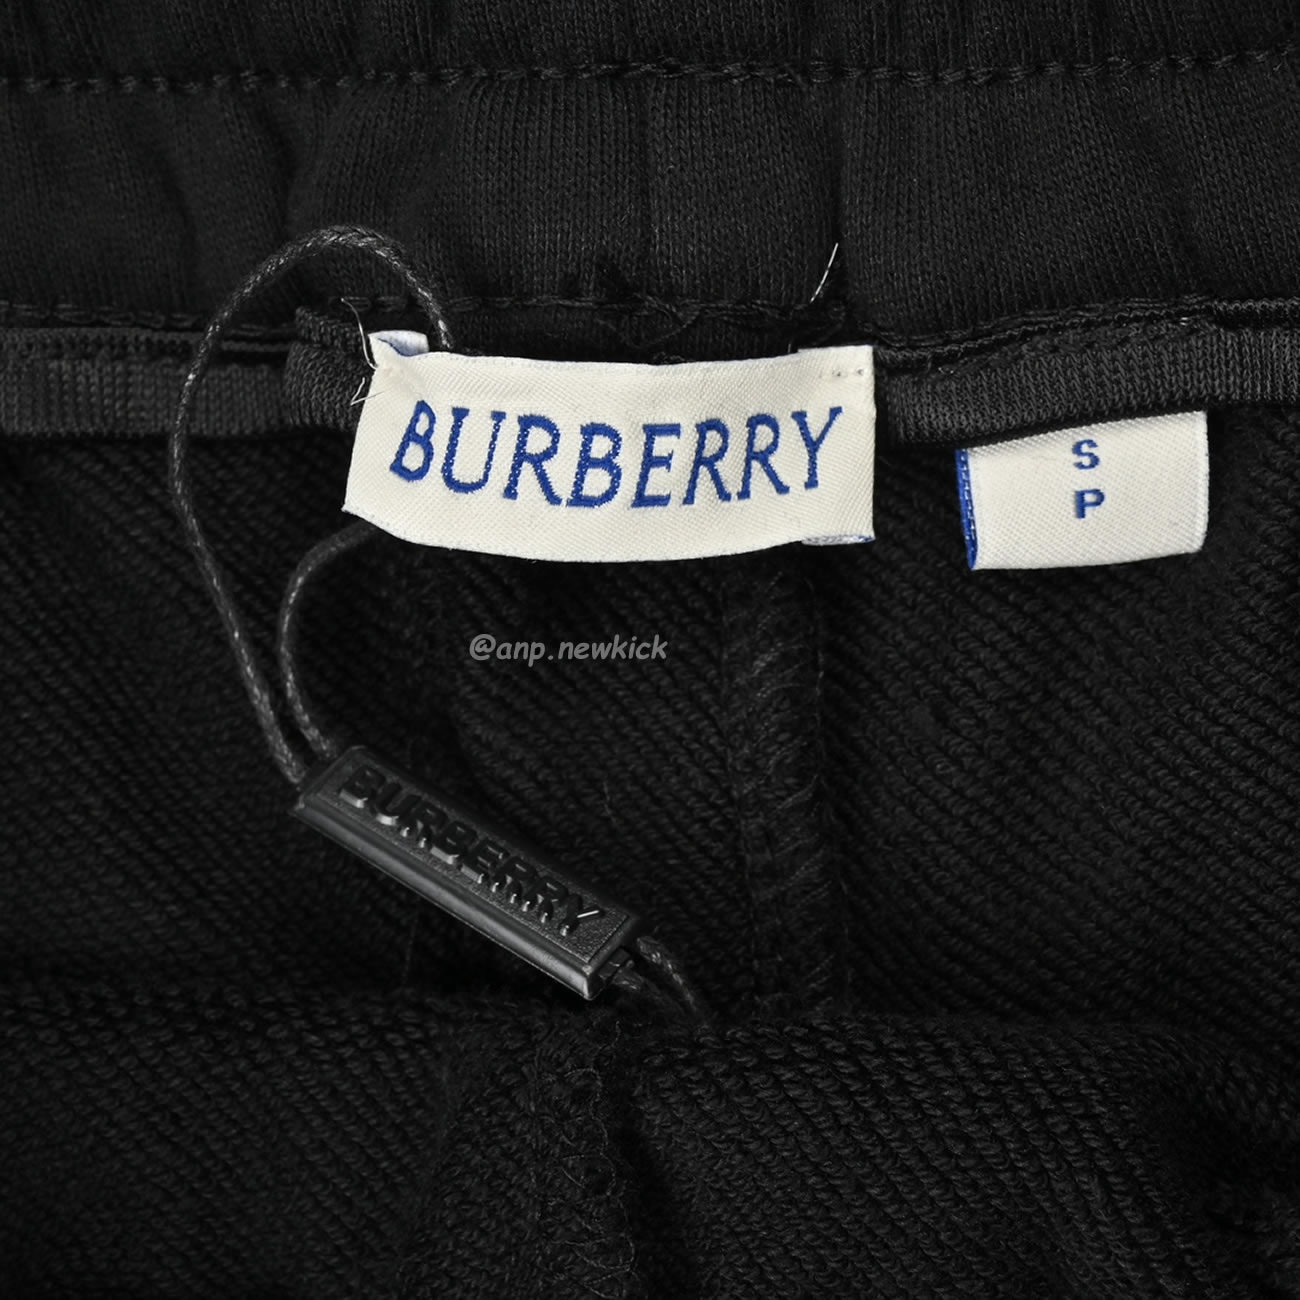 Burberry 24ss Rope Embroidered Knight Warrior Horse Small Label Colored Shorts (6) - newkick.org